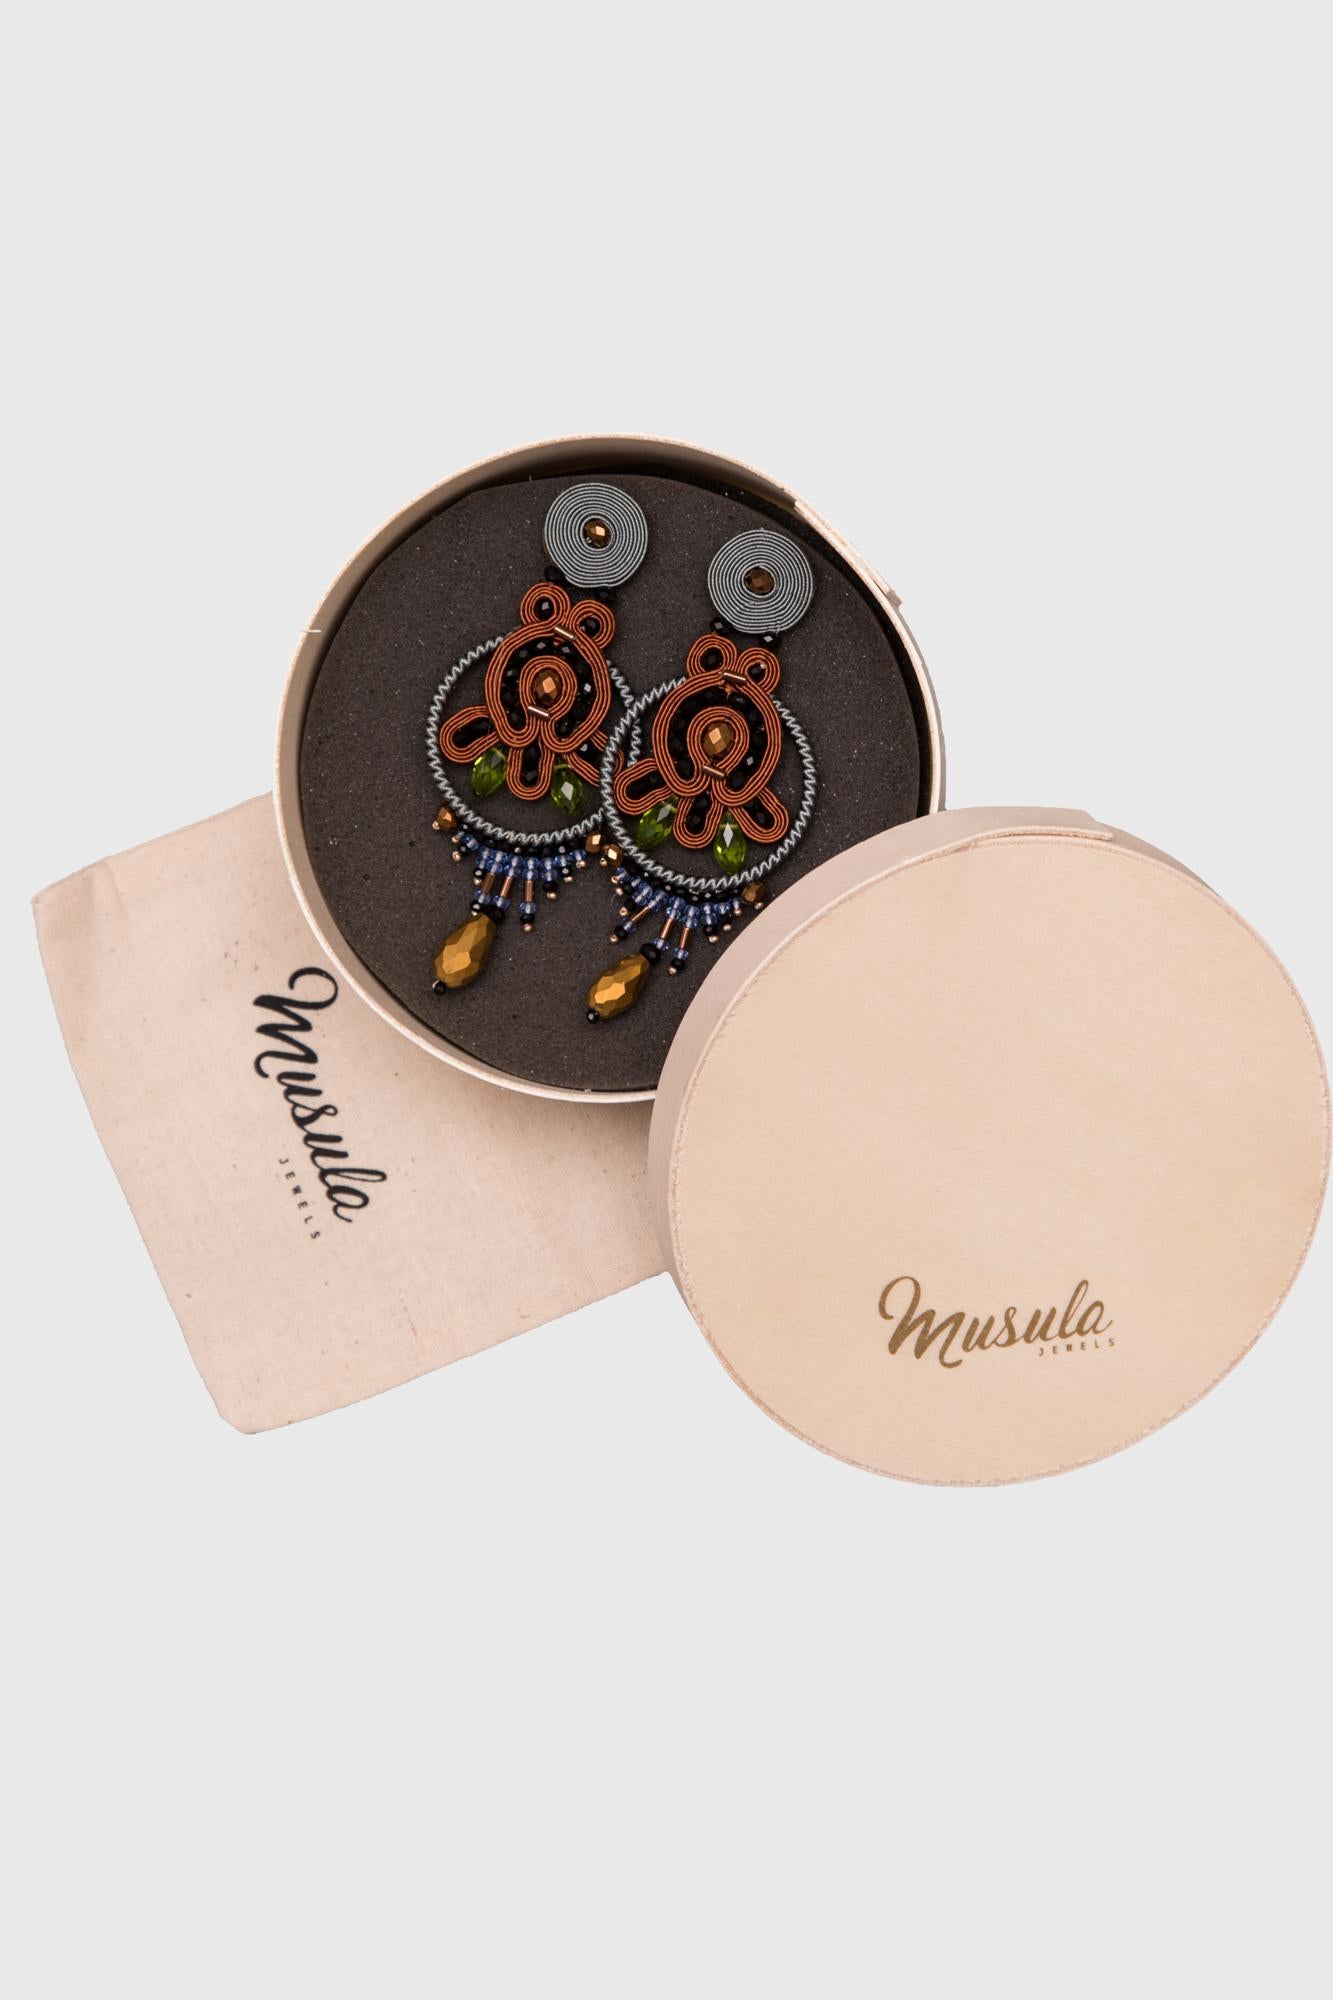 Musula La Patisserie Saint-Honoré Choco Earrings
La Patisserie Collection is a special homage to sweet lovers
Musula in the Fall collection 2021 wants  to pay tribute to the sweet and delicate Pastry world. Pastries have been always a must at our